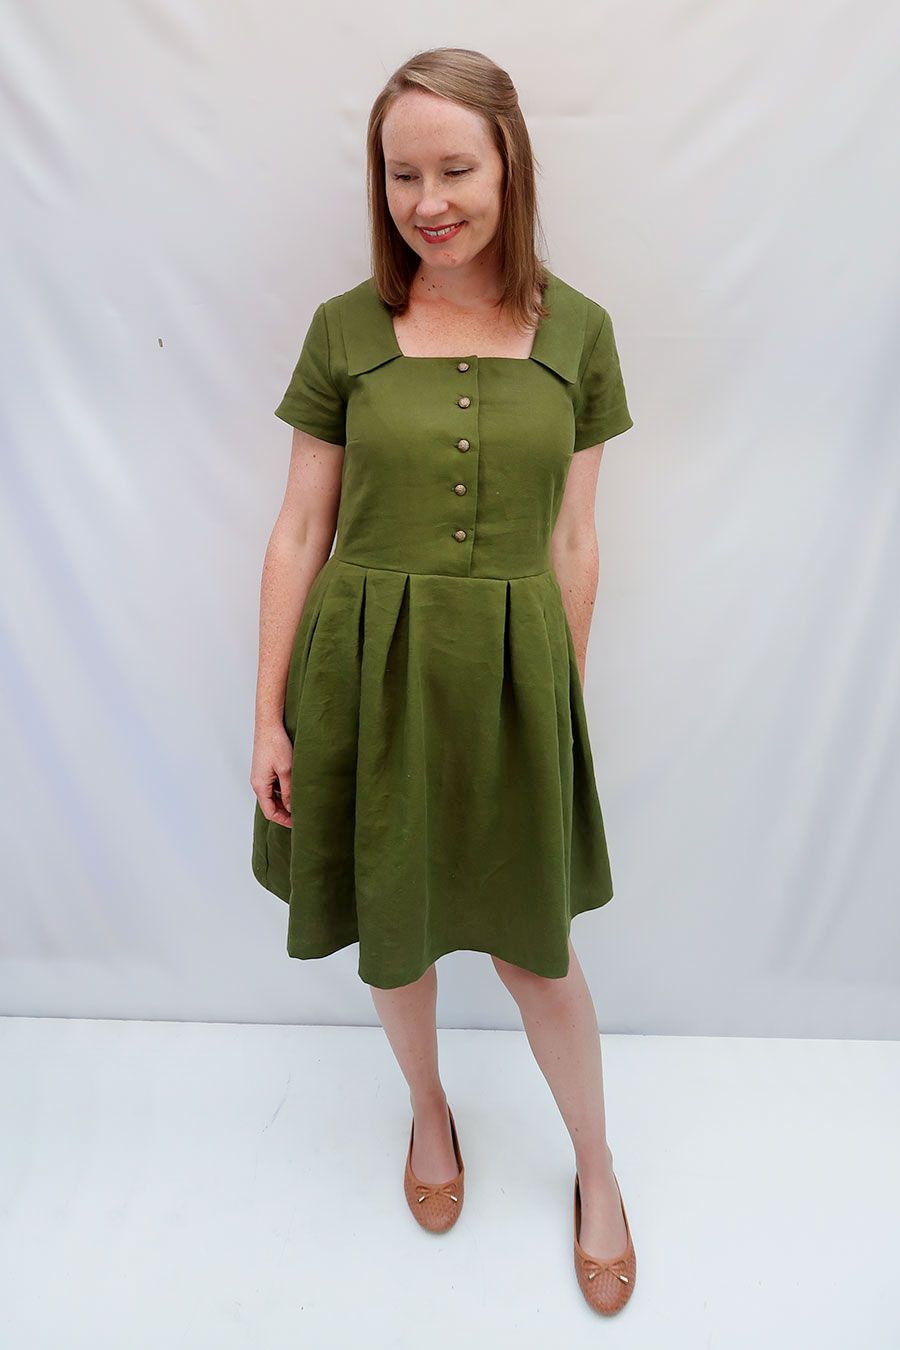 Woman wearing the Asteria Dress sewing pattern from Jennifer Lauren Handmade on The Fold Line. A dress pattern made in cotton lawn, voile, poplin, linen, chambray, rayon, silks, denims, pinwale cords, flannel, wool and wool blends fabrics, featuring a squ